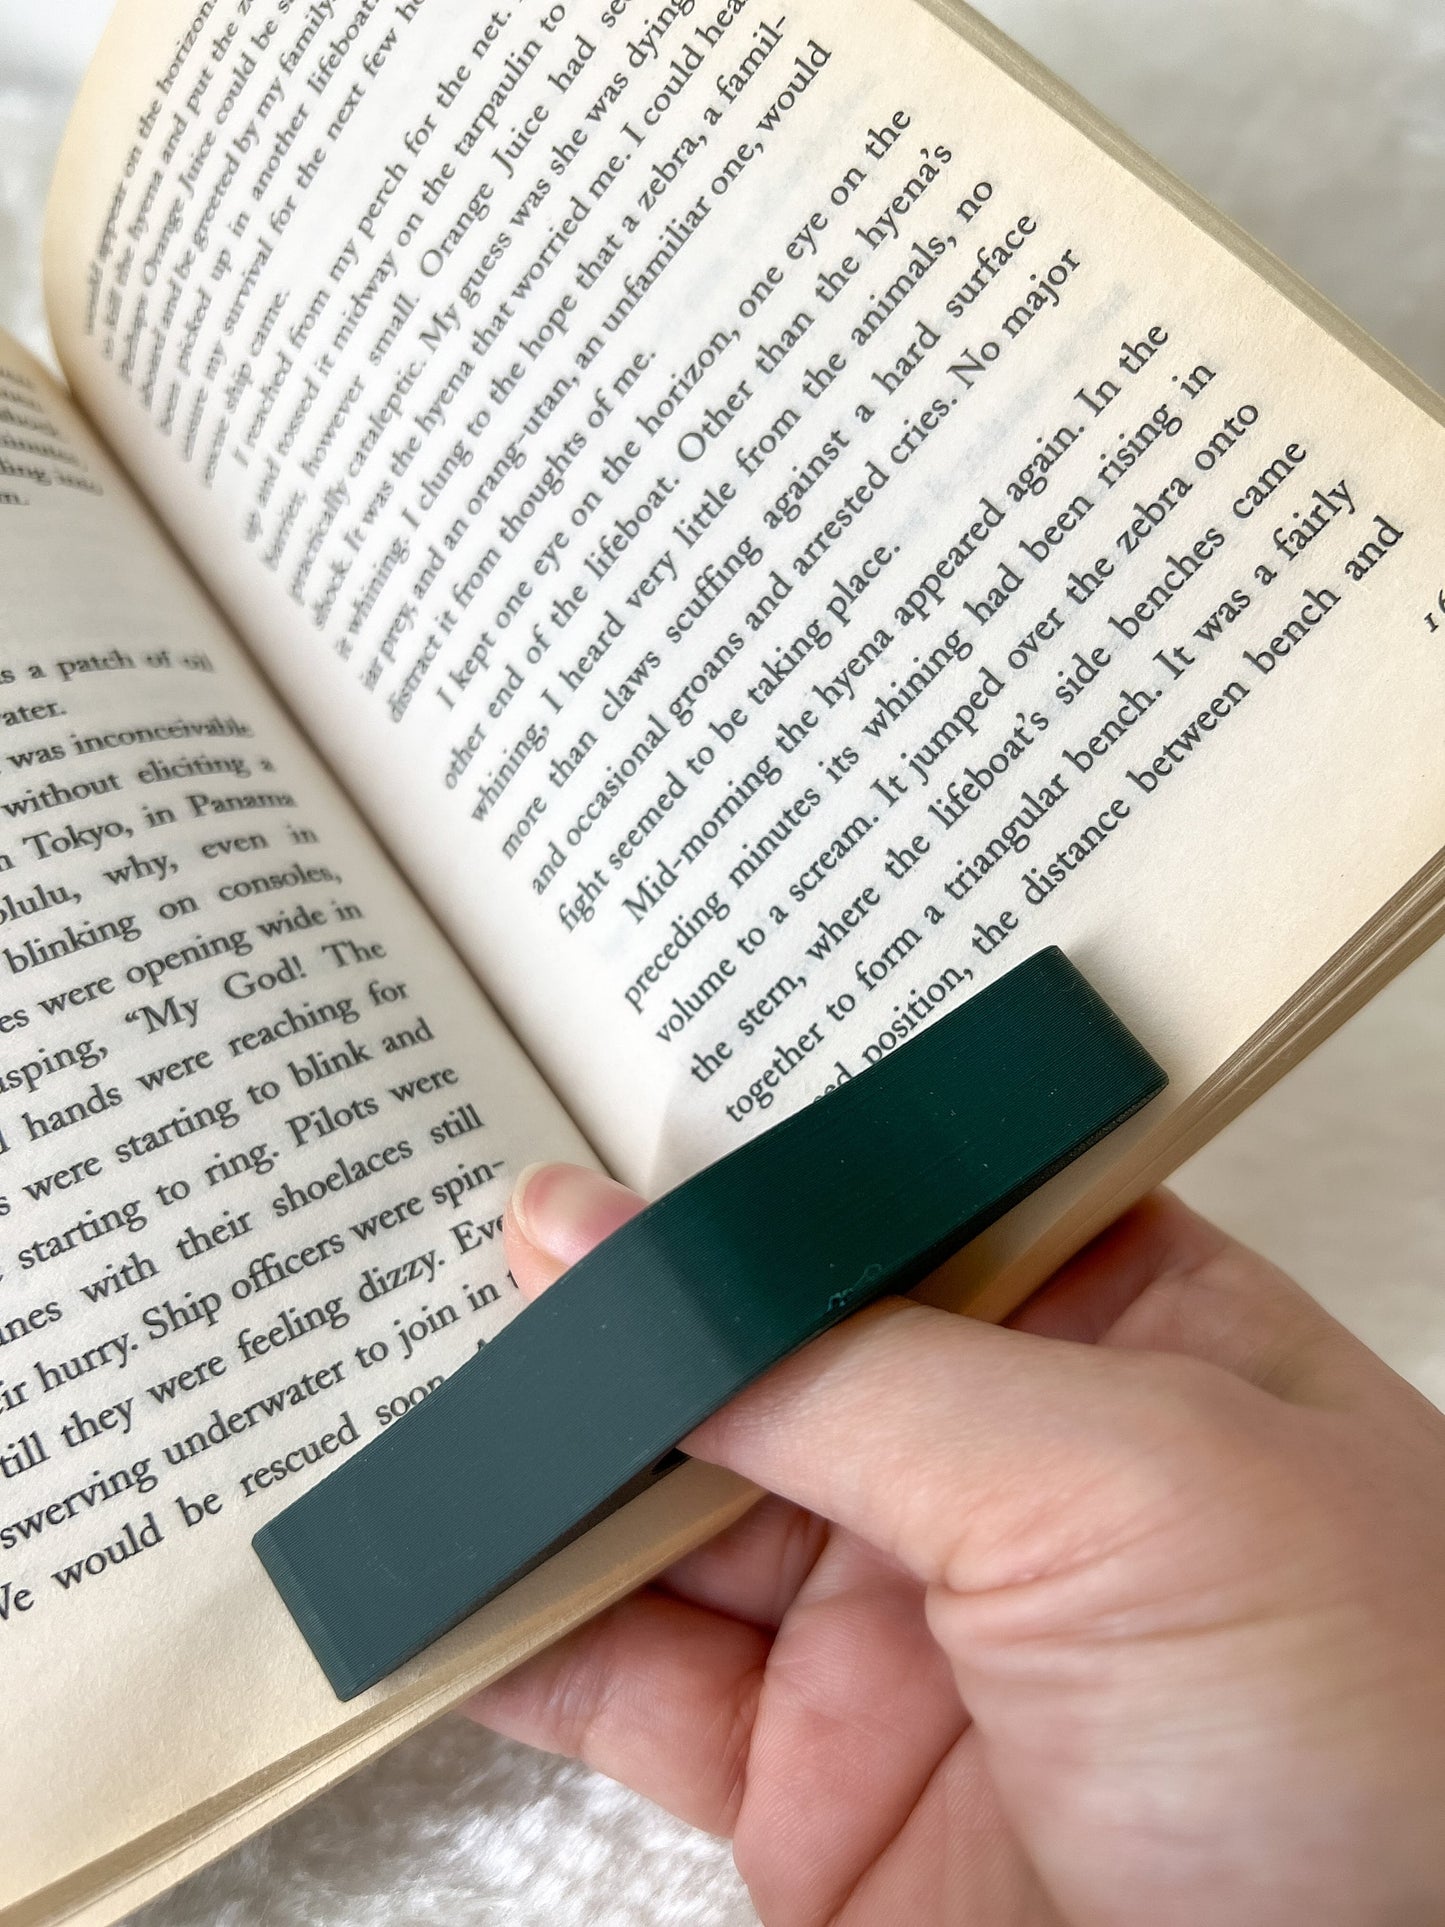 BOOK PAGE HOLDER | Bookmark, Thumb Bookmark, Page Holder, Book Spreader, Book Lover gifts